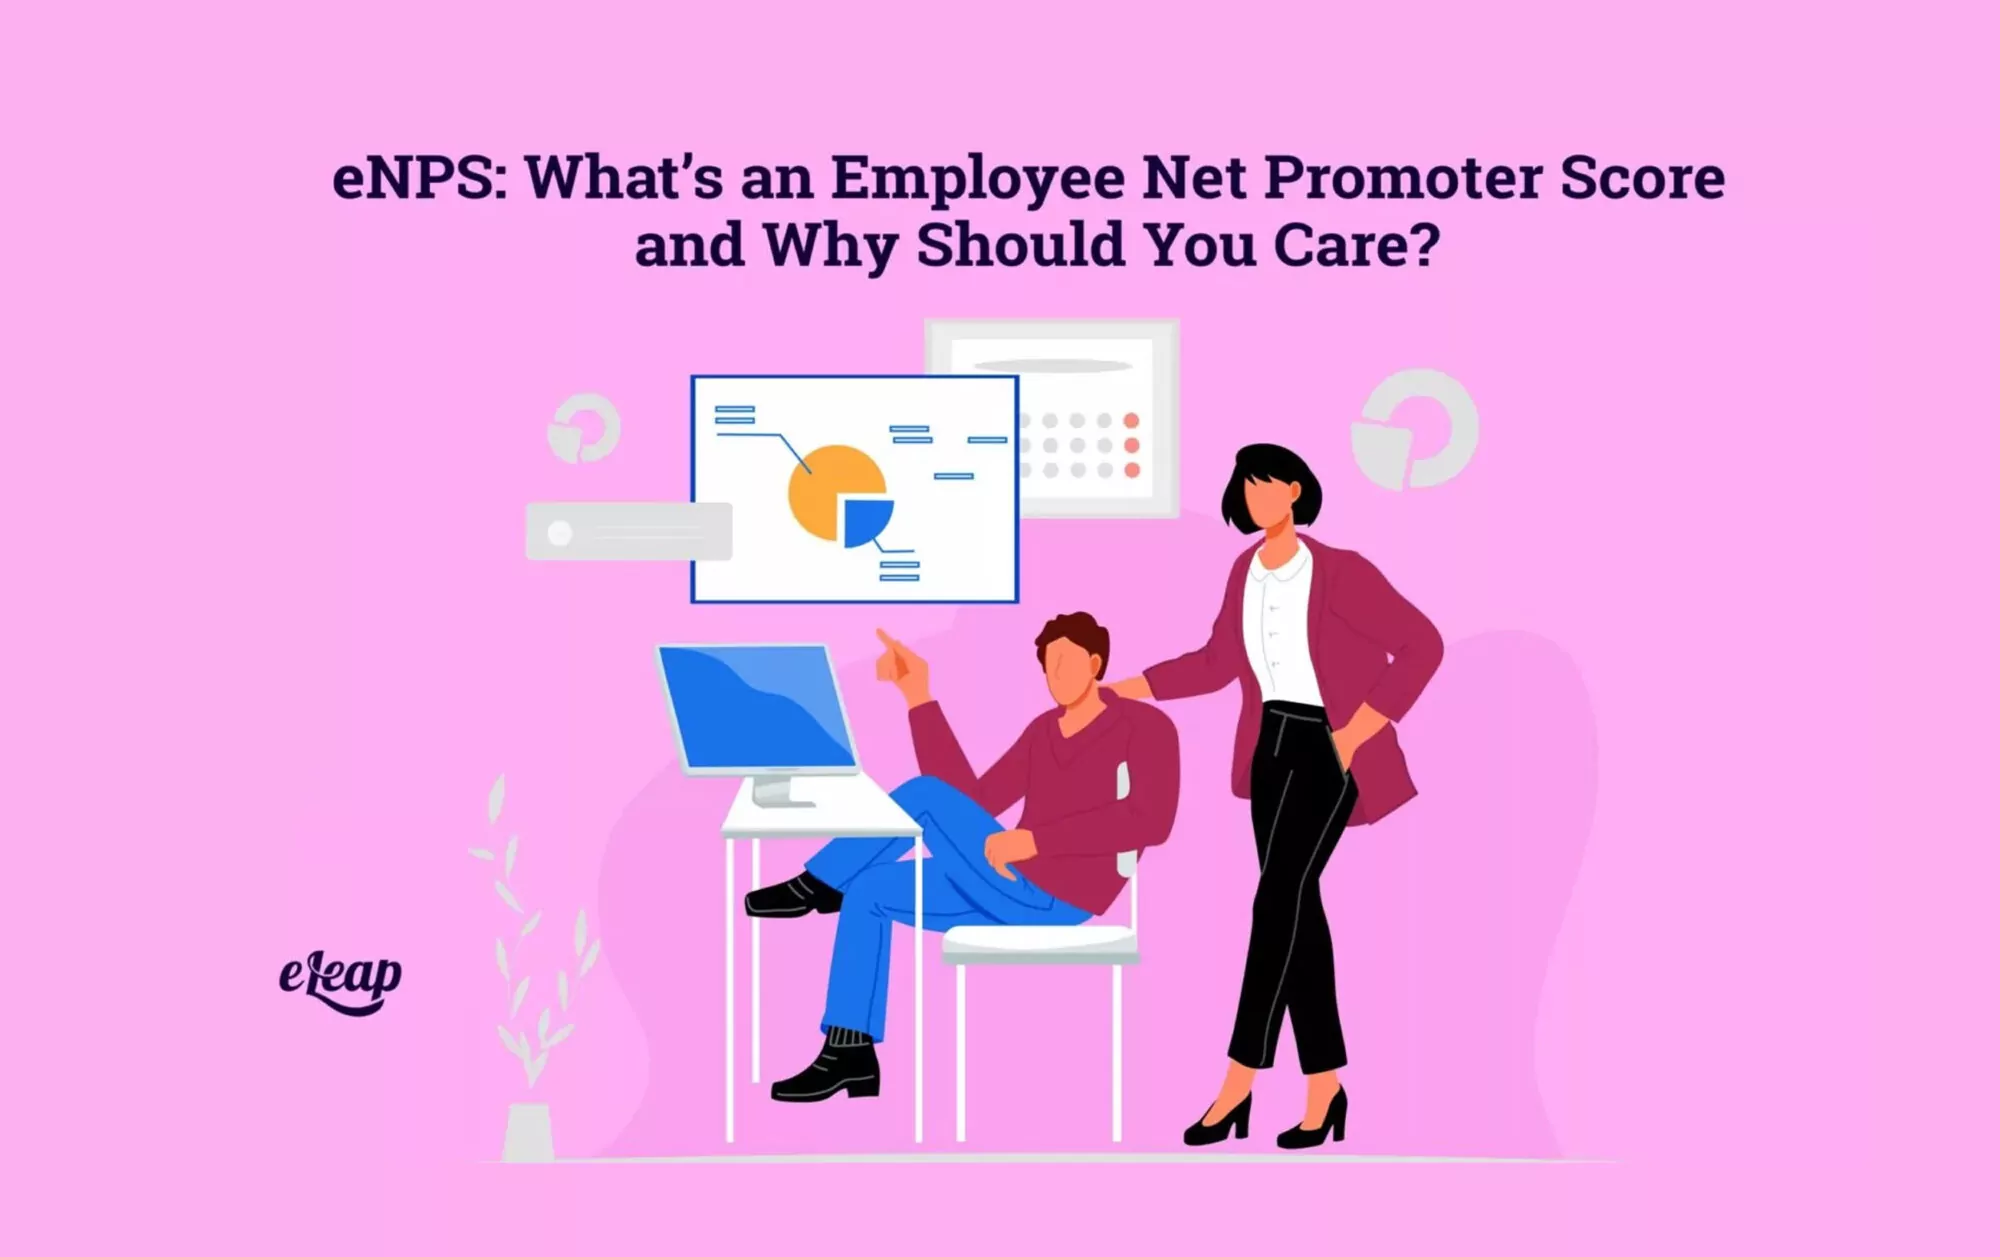 eNPS: What’s an Employee Net Promoter Score and Why Should You Care?